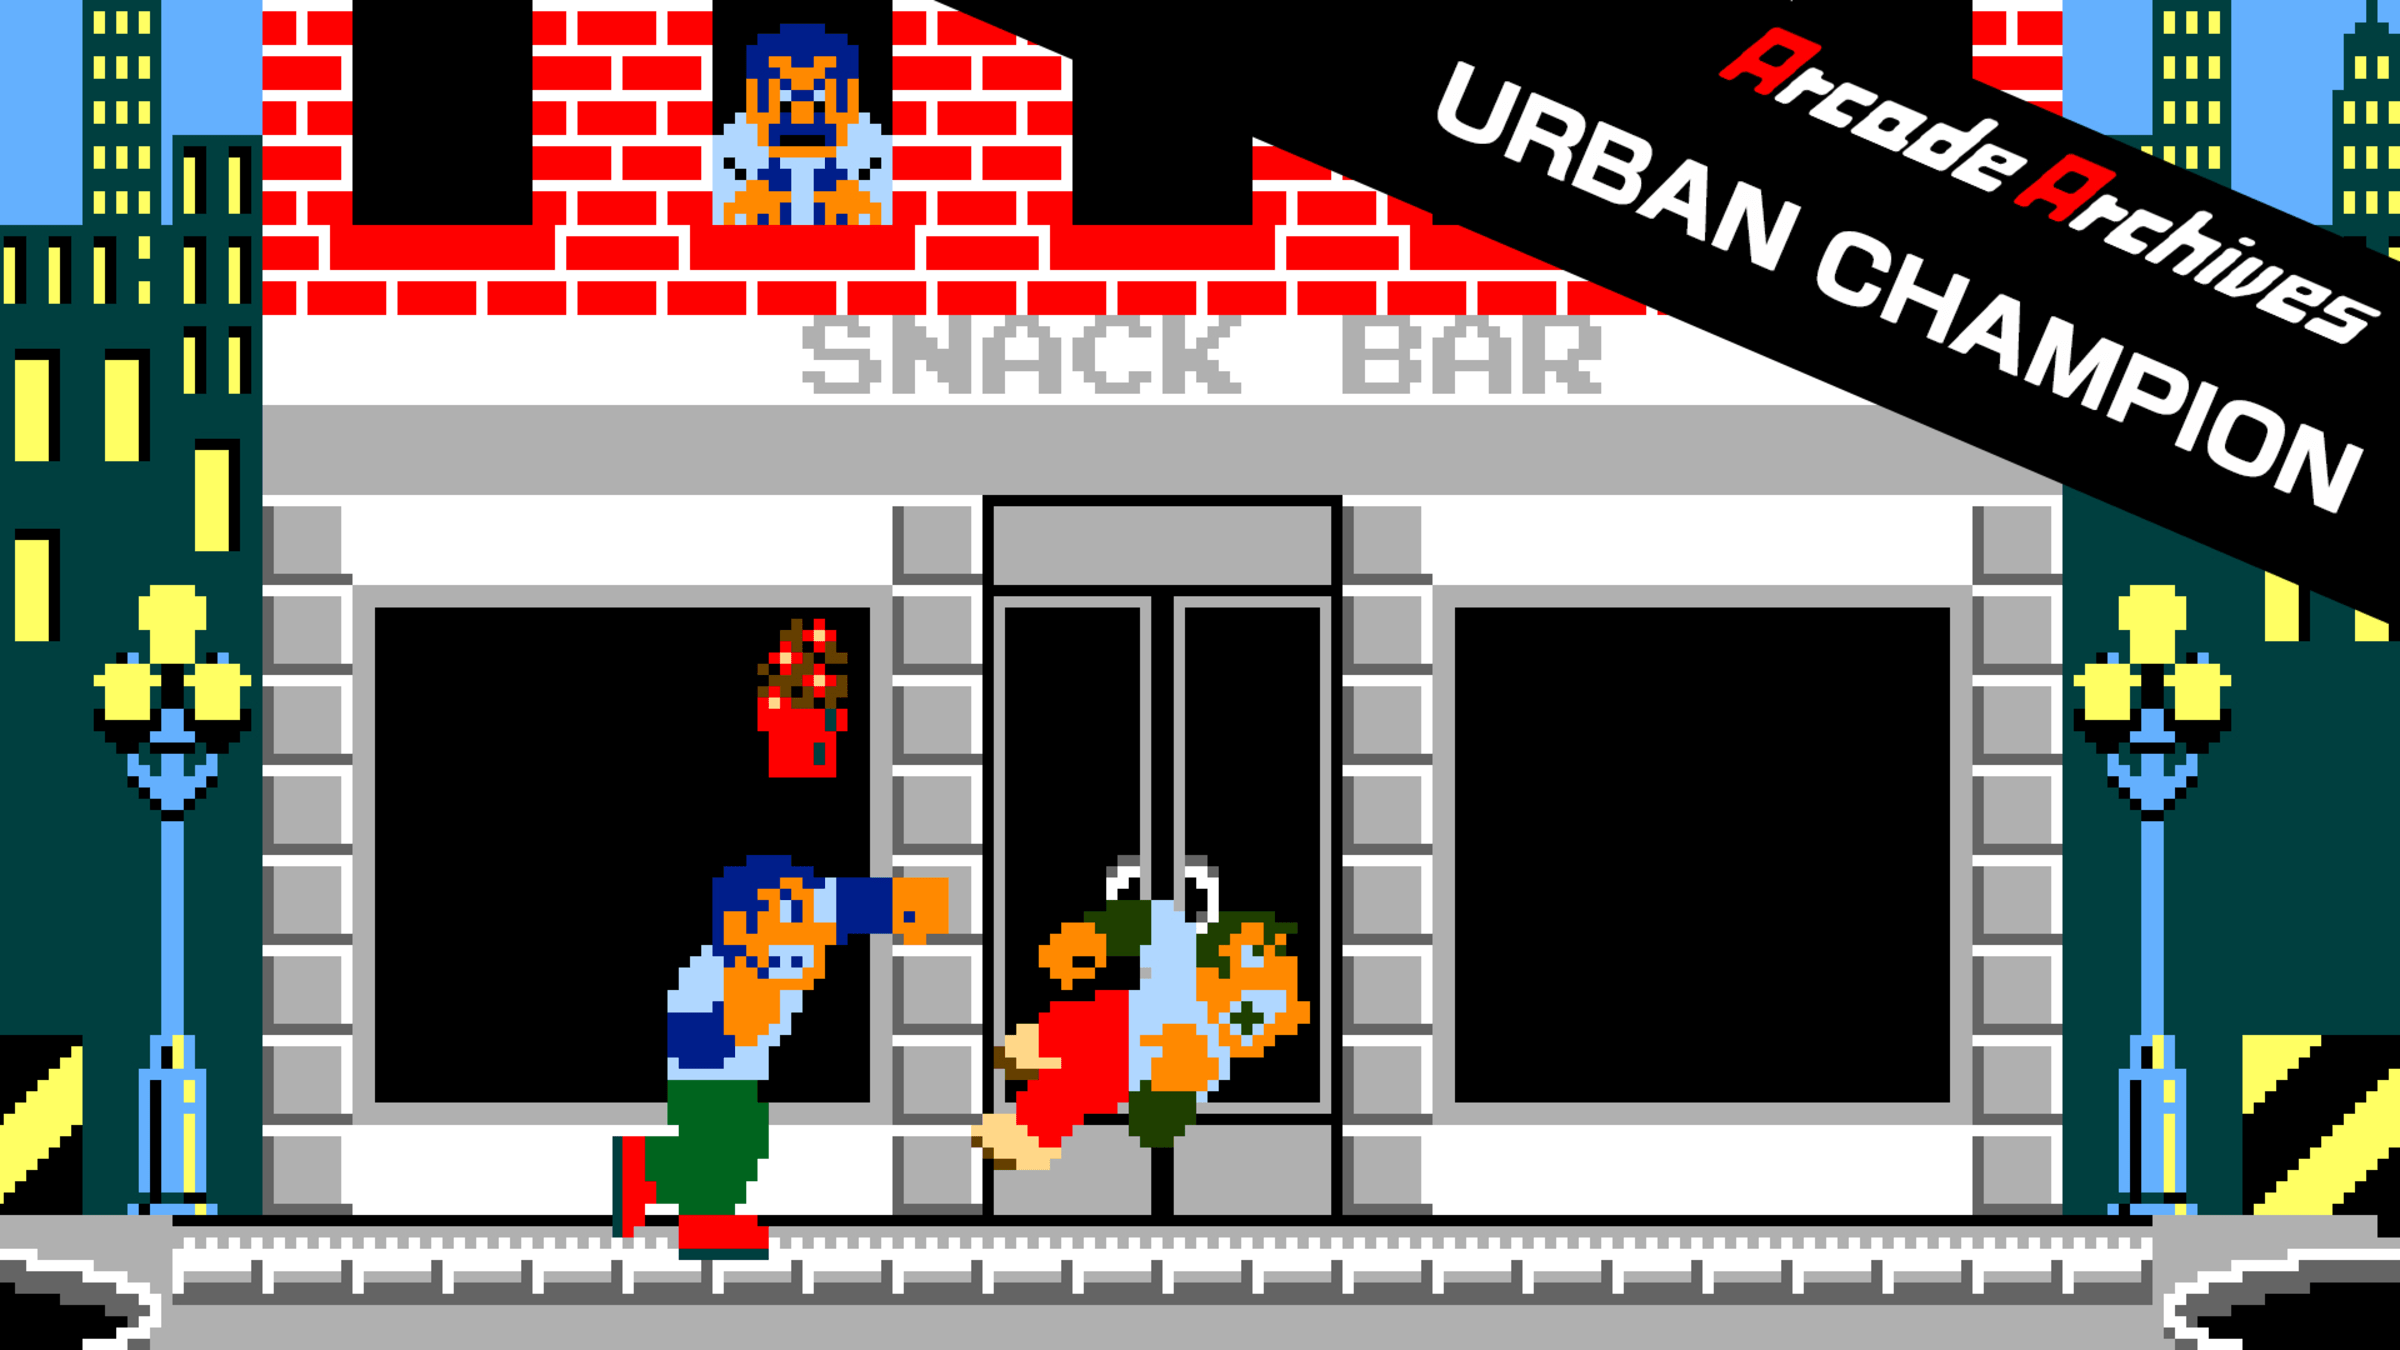 Arcade Archives URBAN CHAMPION for Nintendo Switch - Nintendo Official Site